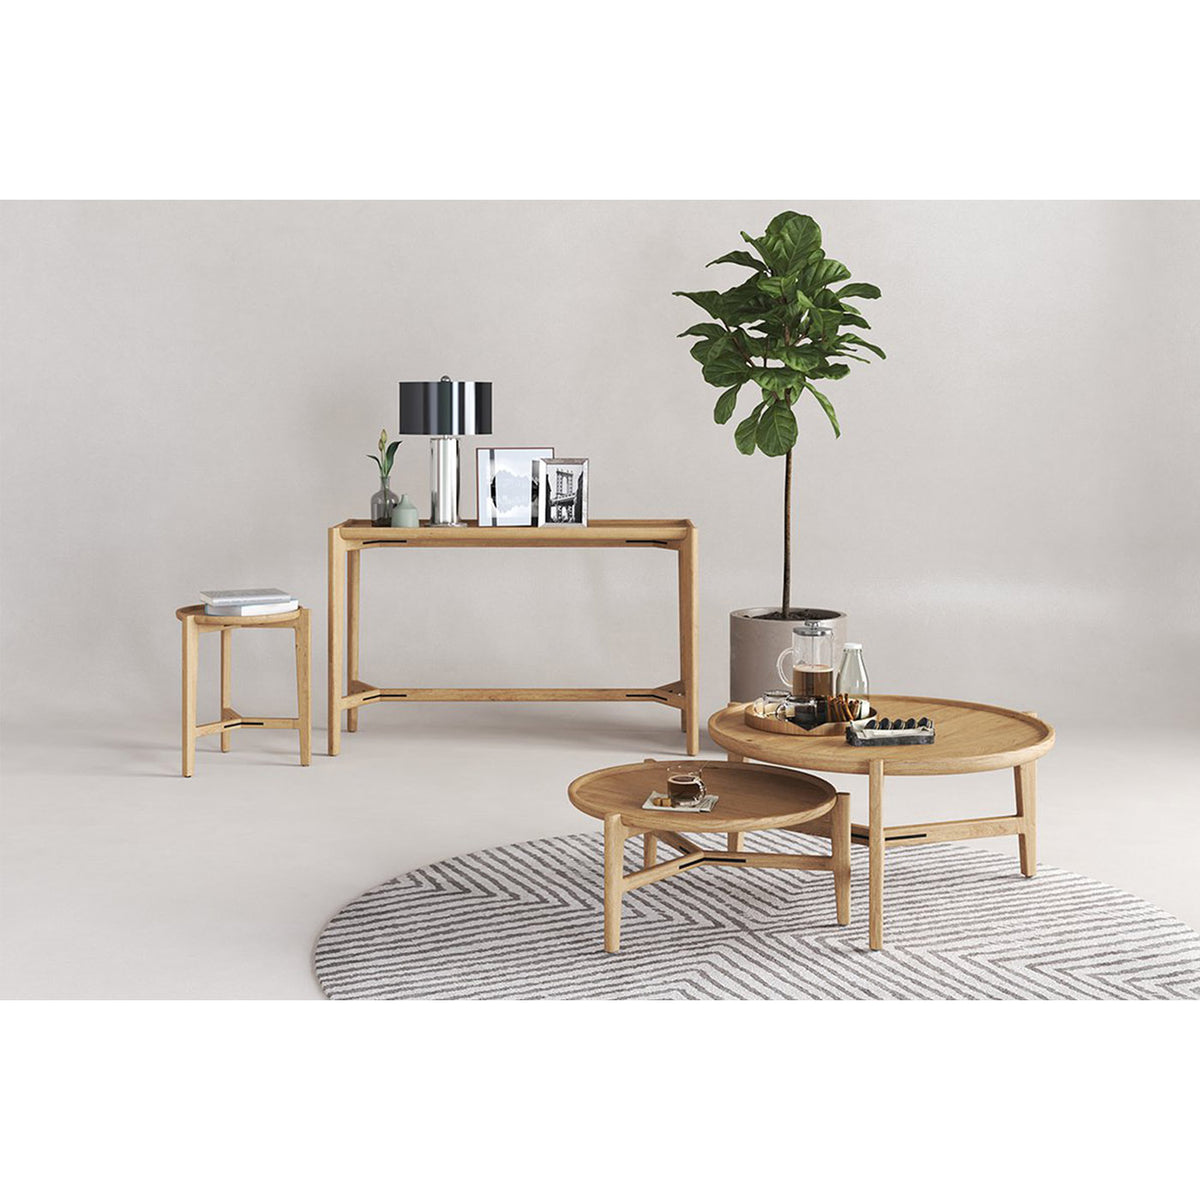 Riley Solid Teak Console Table in Natural - 120cm - Notbrand